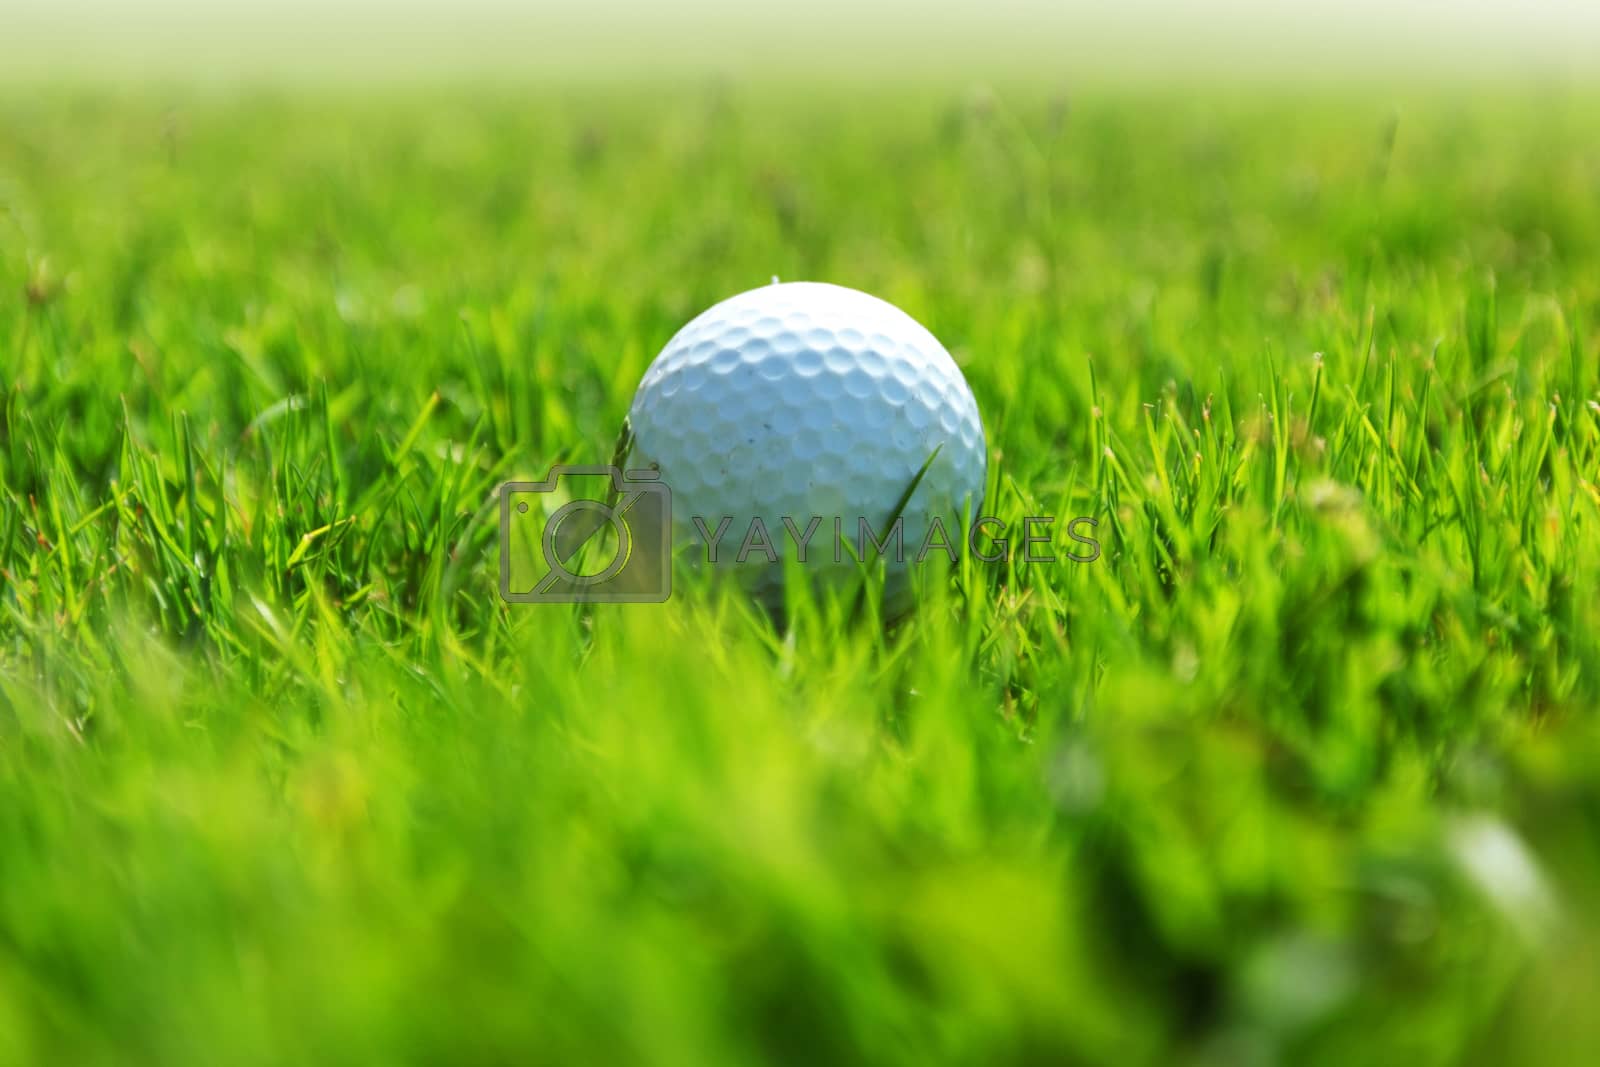 Royalty free image of golf-ball on course by Yellowj